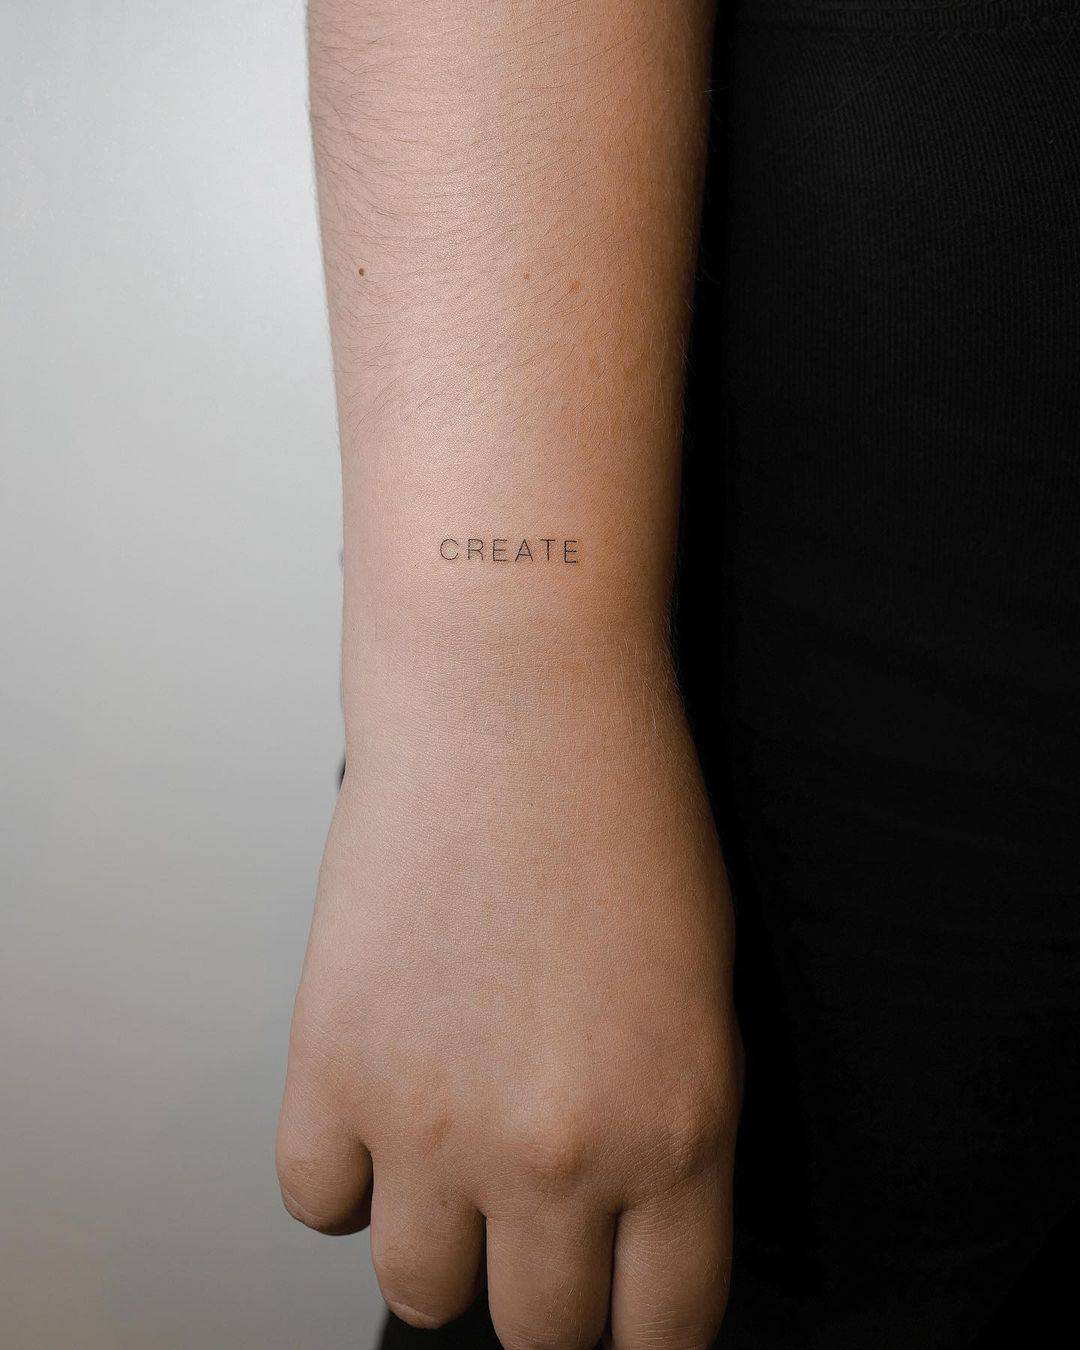 40+ Inspiring Arm Quote Tattoos Ideas: What’s Your Favorite? images 8